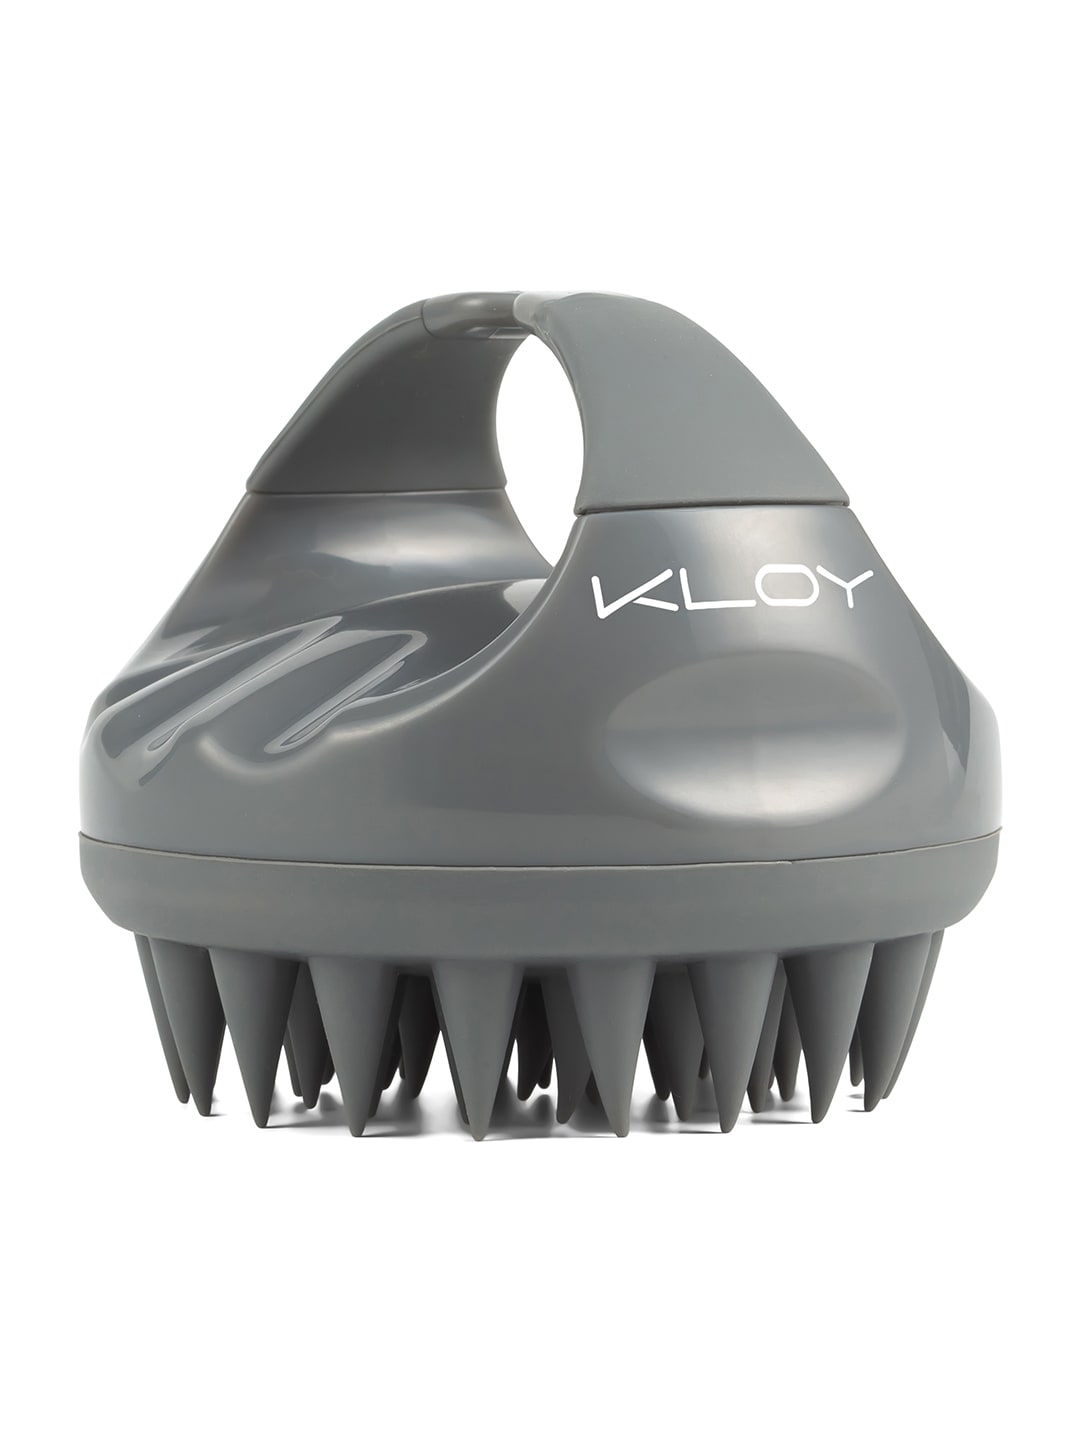 KLOY Grey Hair Scalp Massager Exfoliator Shampoo Brush with Soft Silicone Bristles Price in India